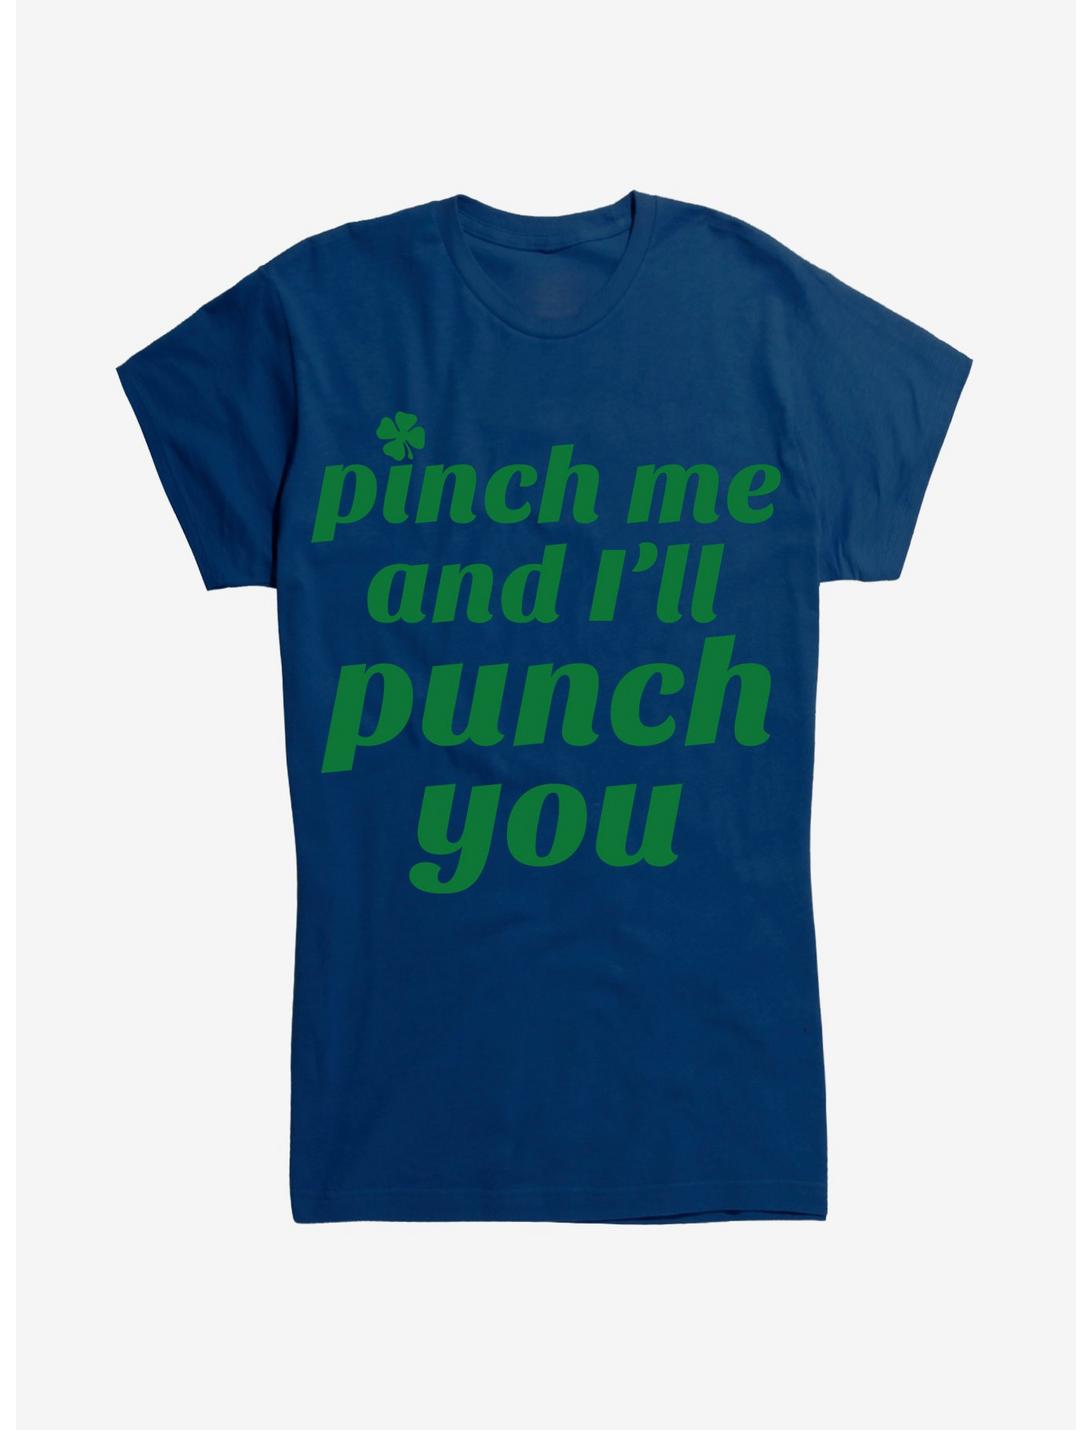 St. Patty's Pinch Me And I'll Punch You Girls T-Shirt, , hi-res